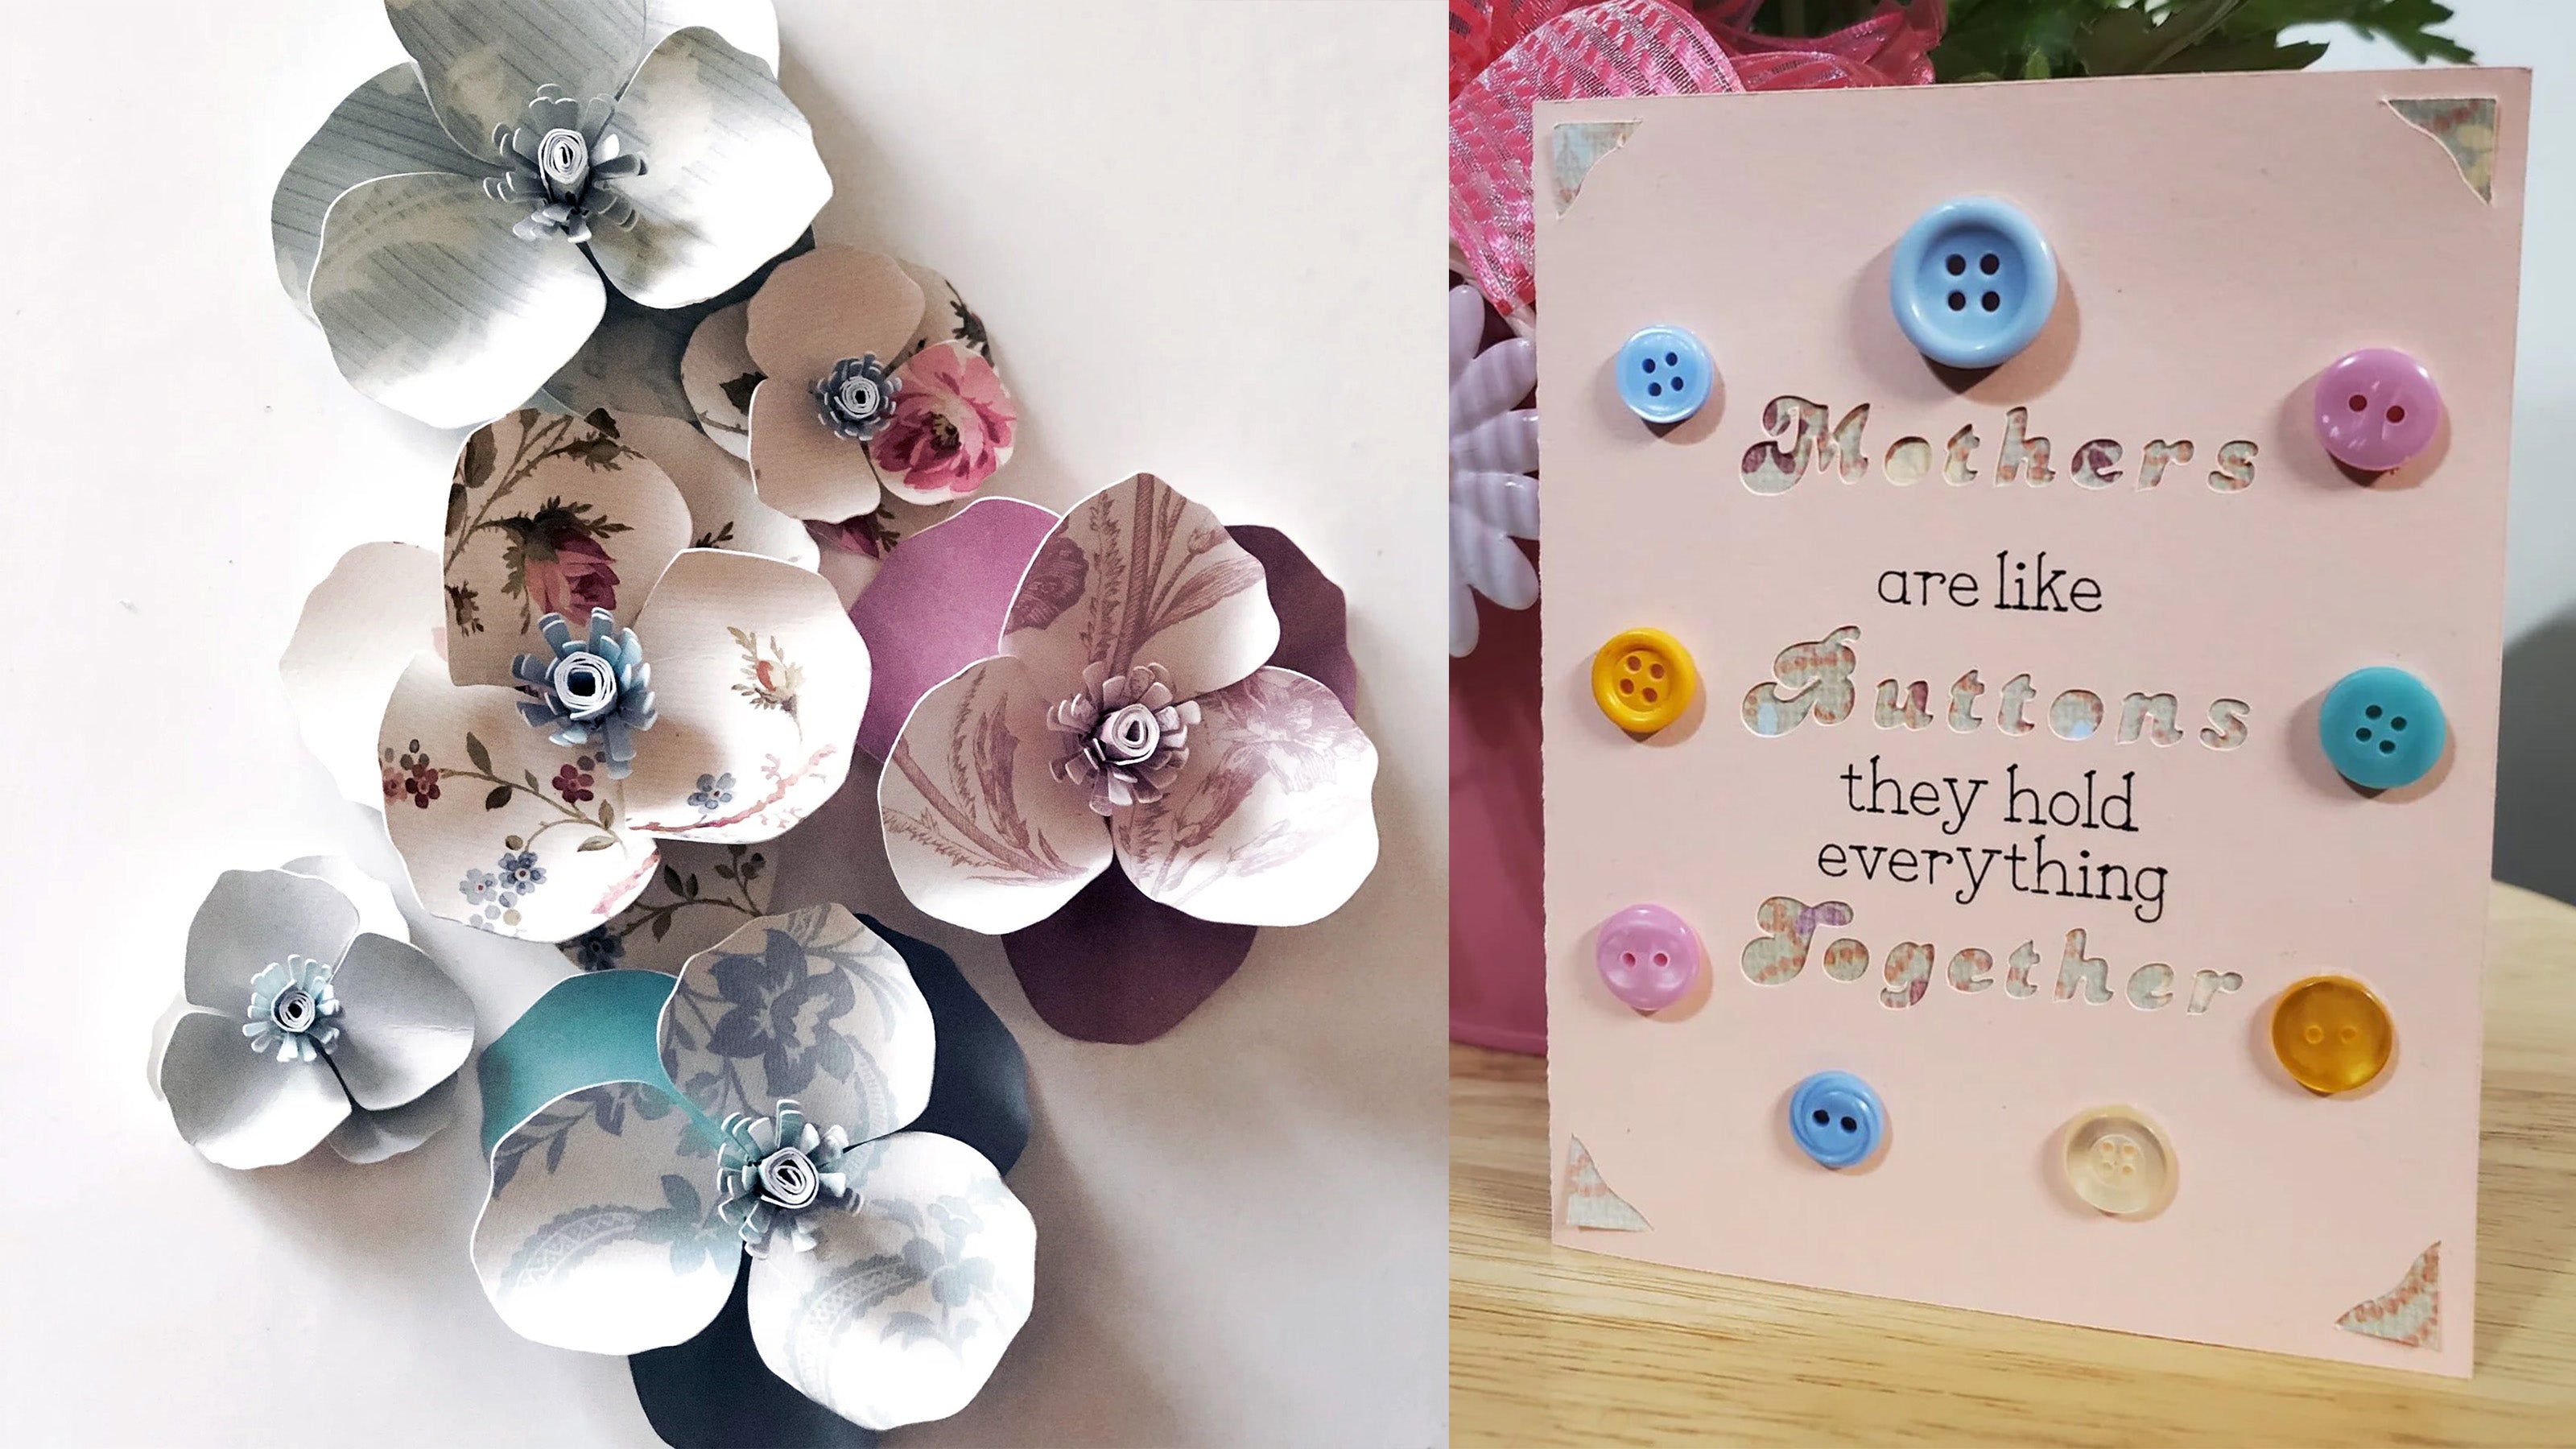 Easy DIY Mother's Day Gifts That Will Send a Heartfelt Message This Year